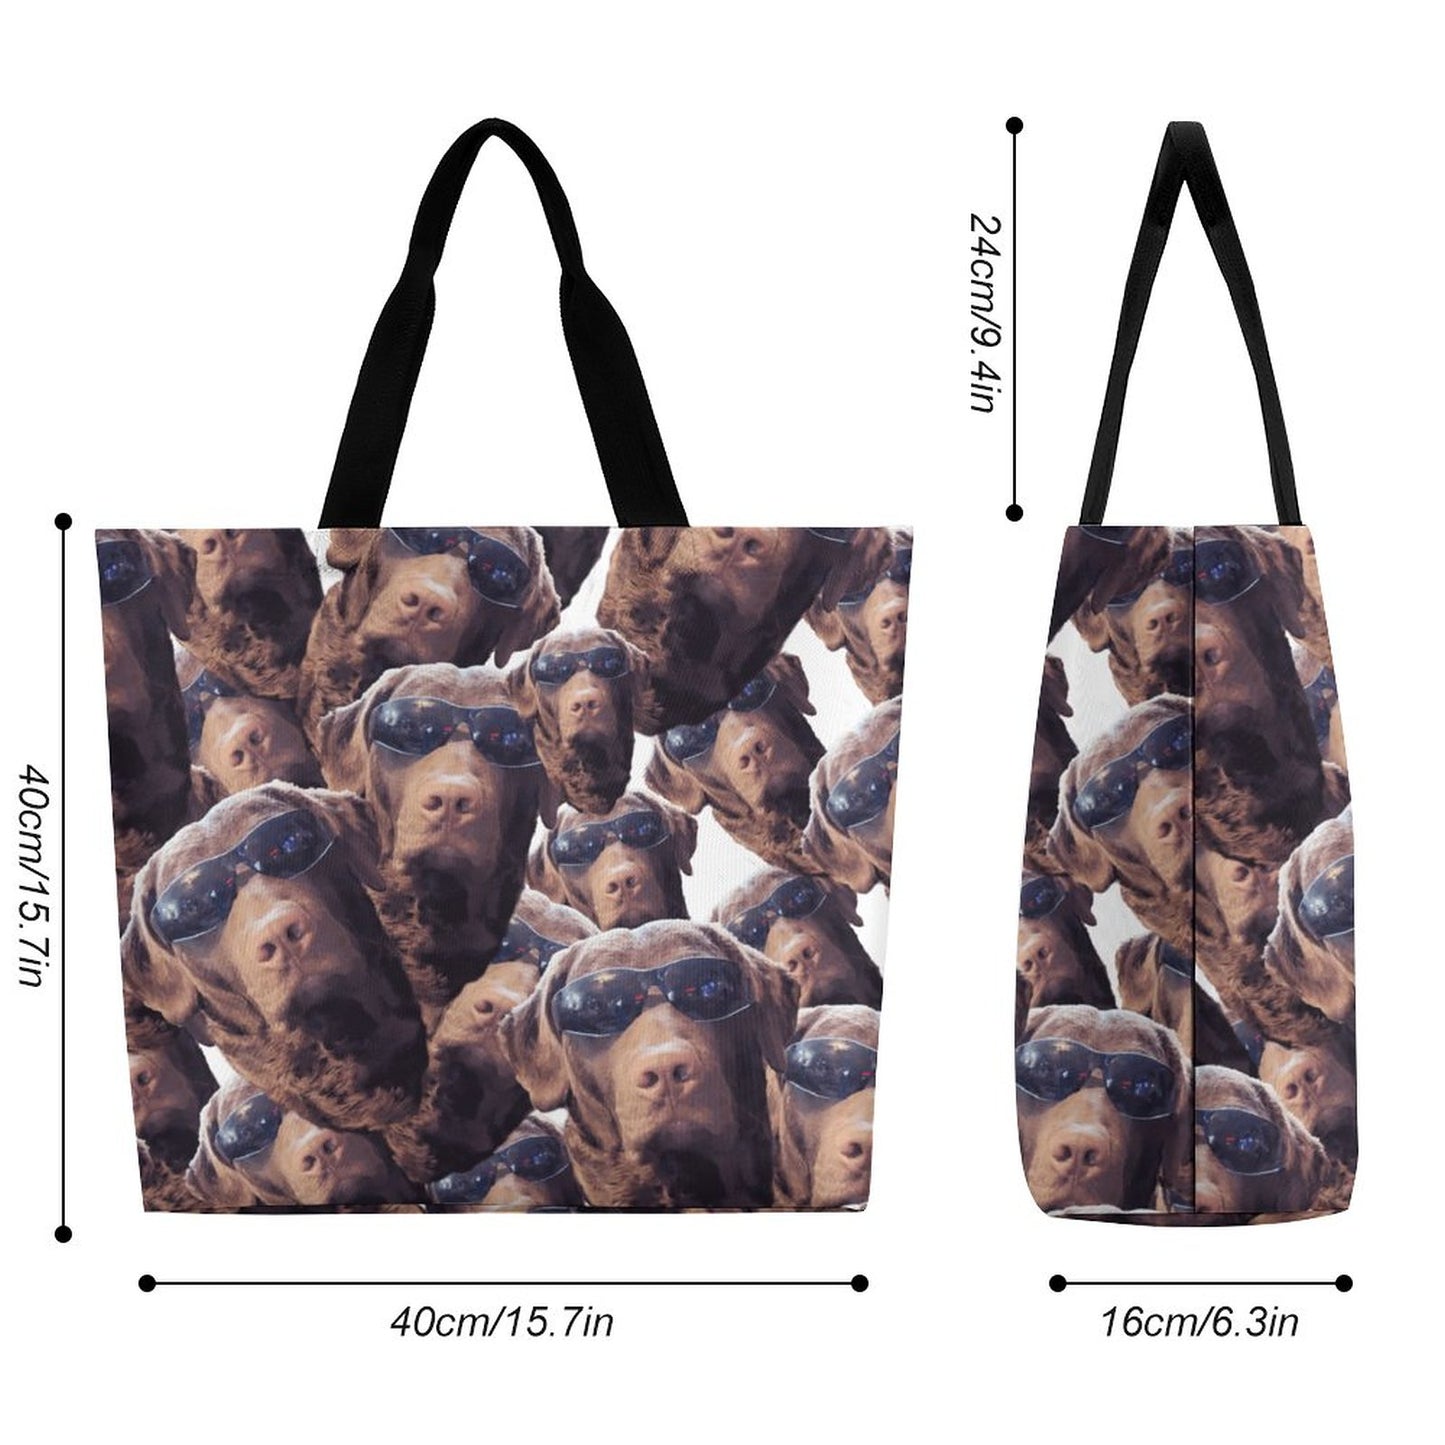 FOXY LADY _ LAB _ COLLAGE FACE DESIGN - Large One Shoulder Shopping Bag